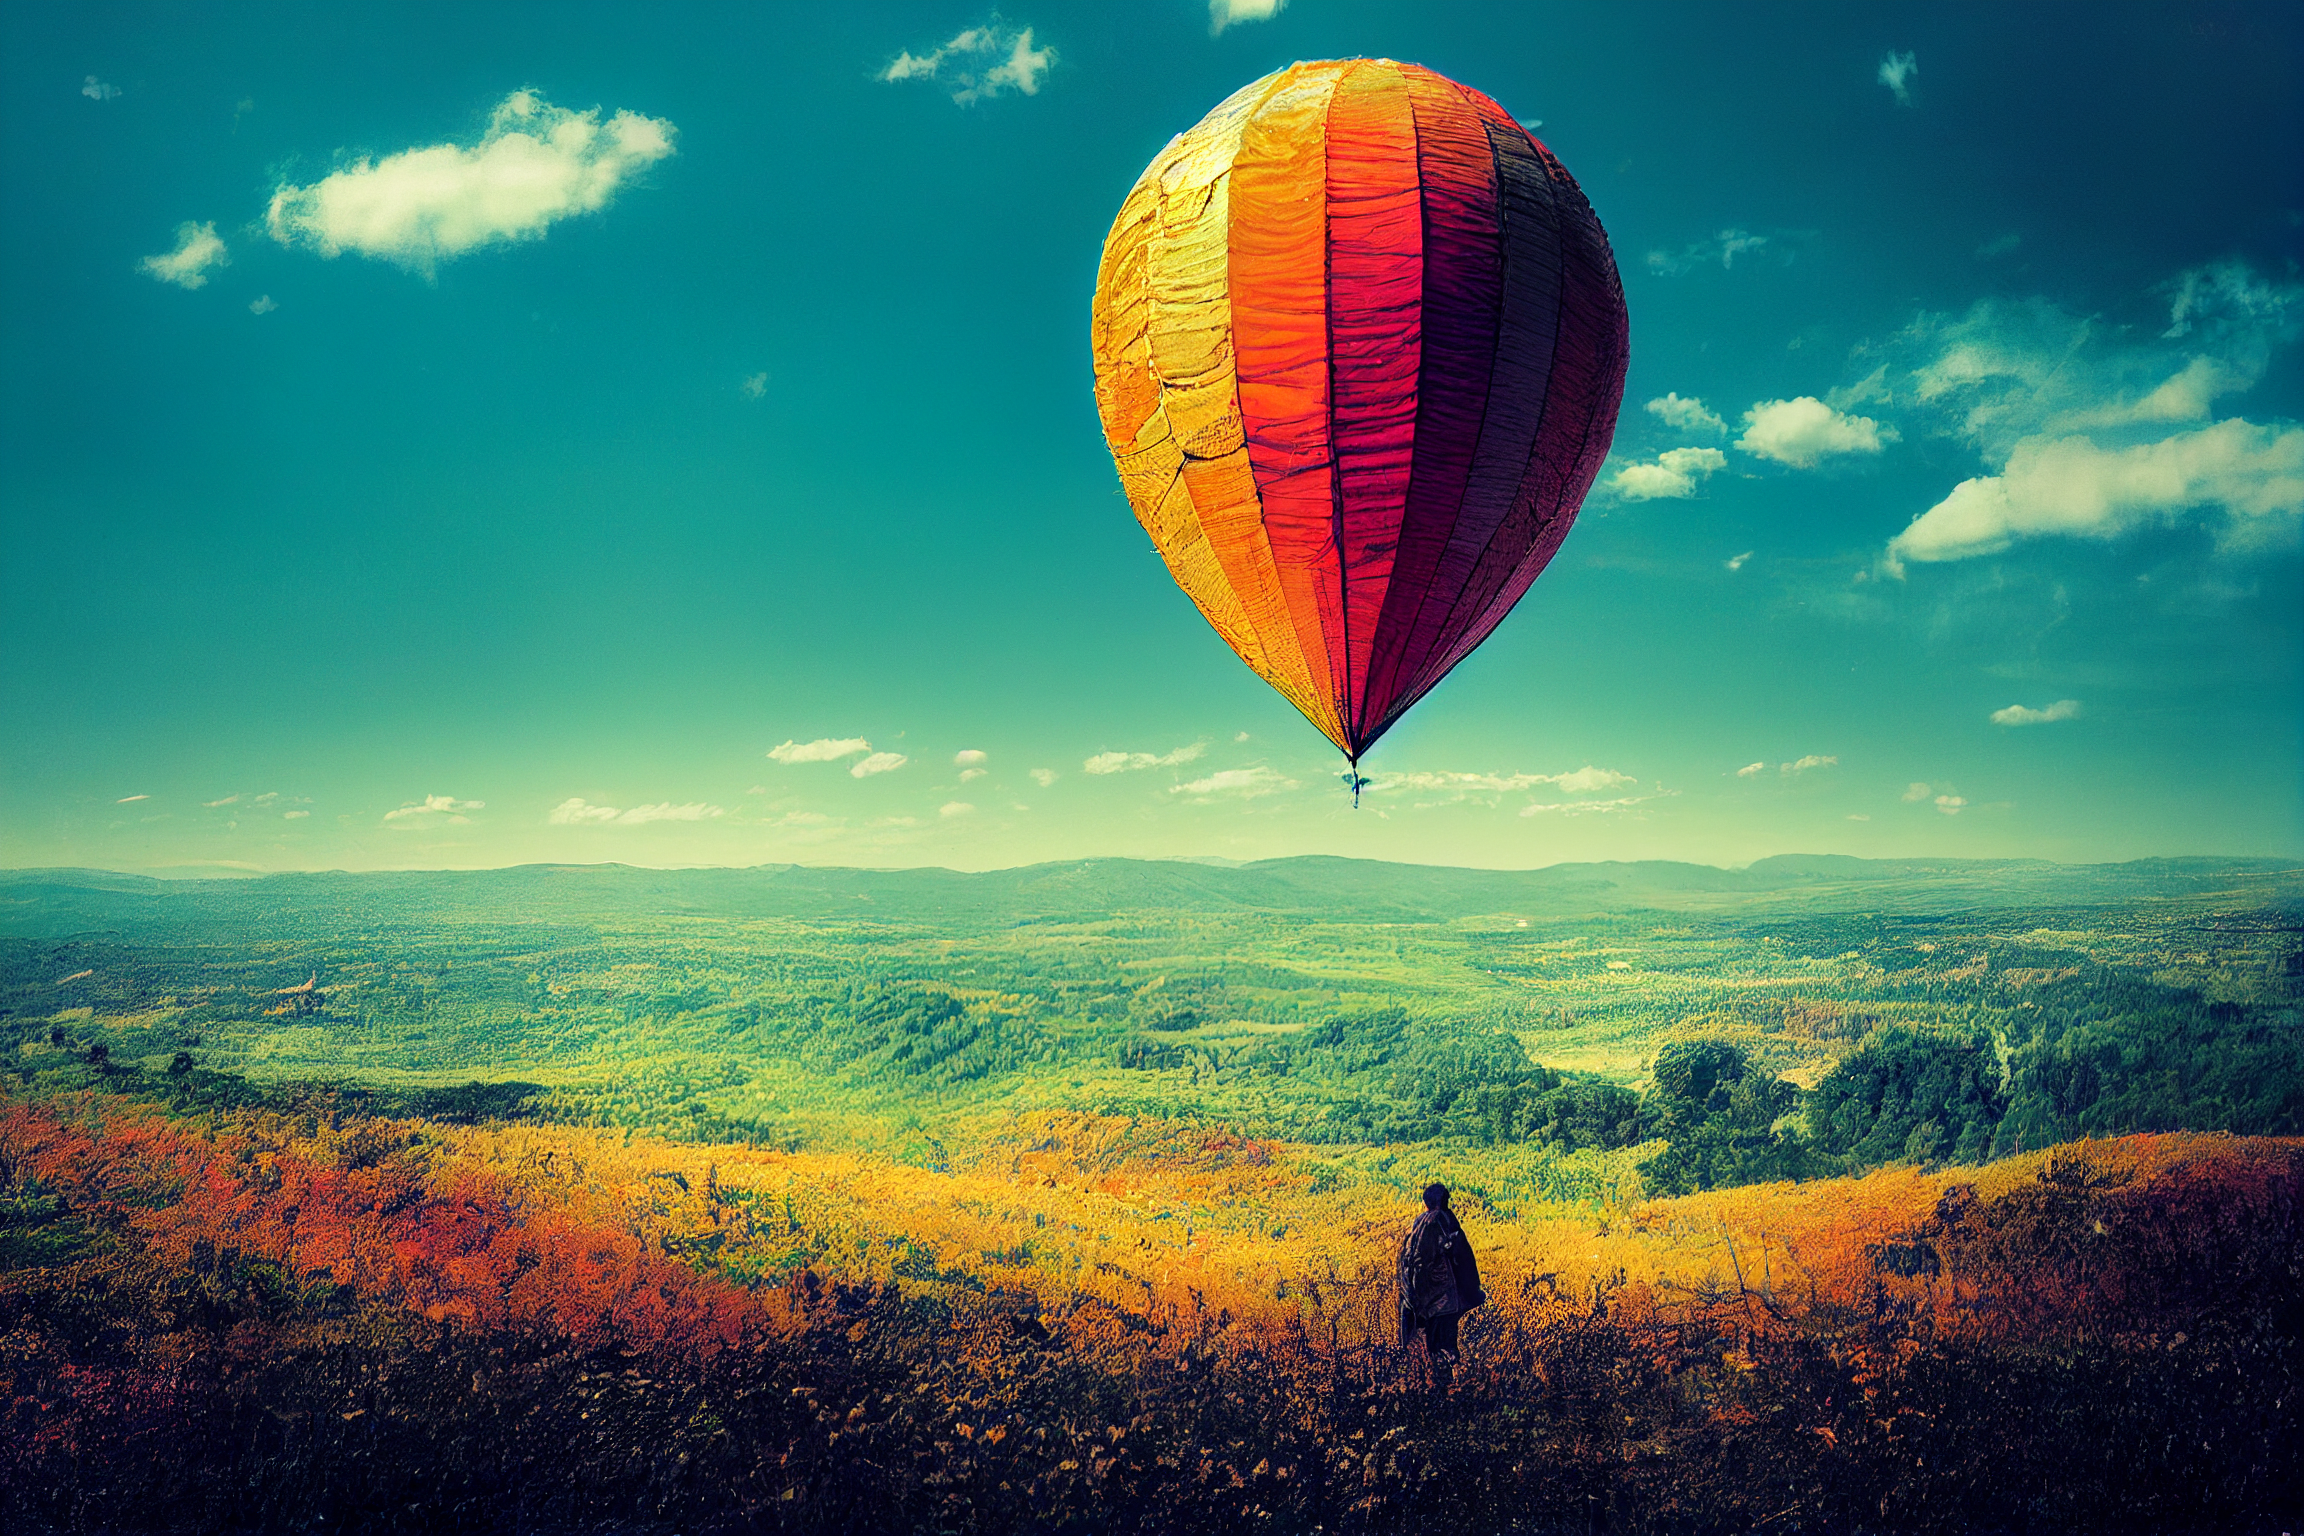 I’ll keep my head up high through the downs and lows – Surreal balloon above a landscape